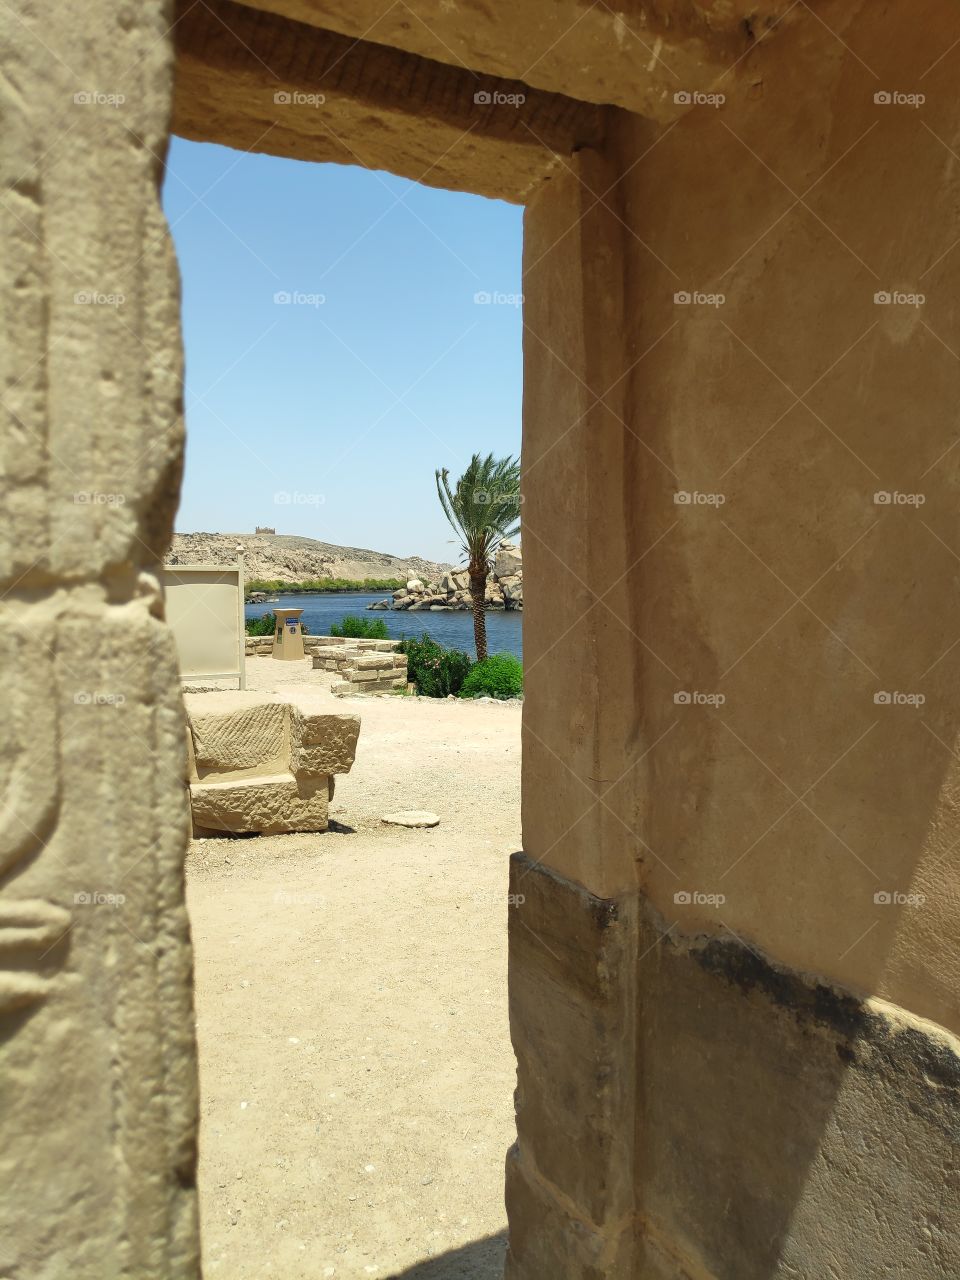 Nile River from the temple of  Philae - Aswan - Egypt